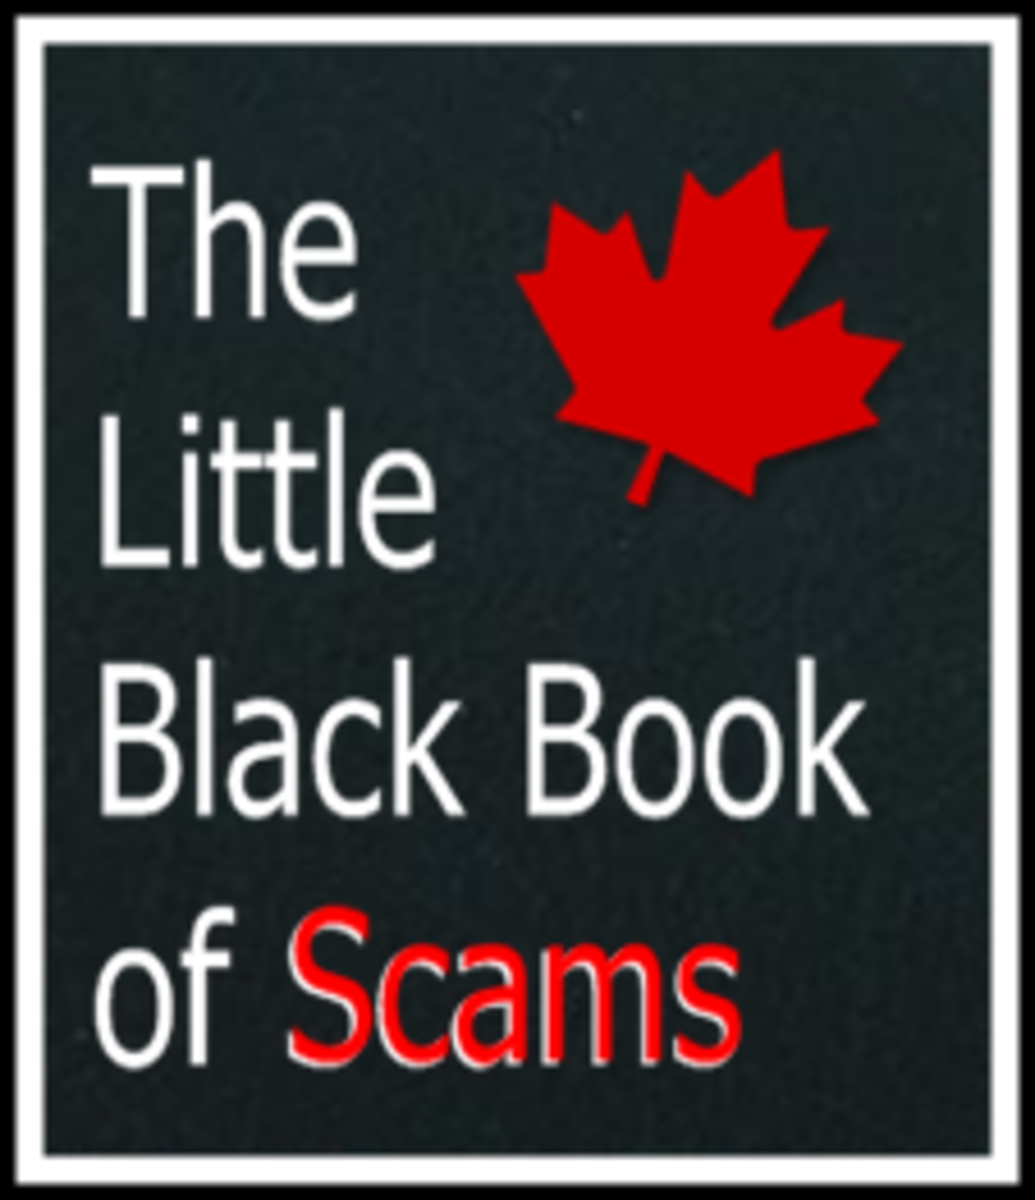 The Little Black Book of Scams